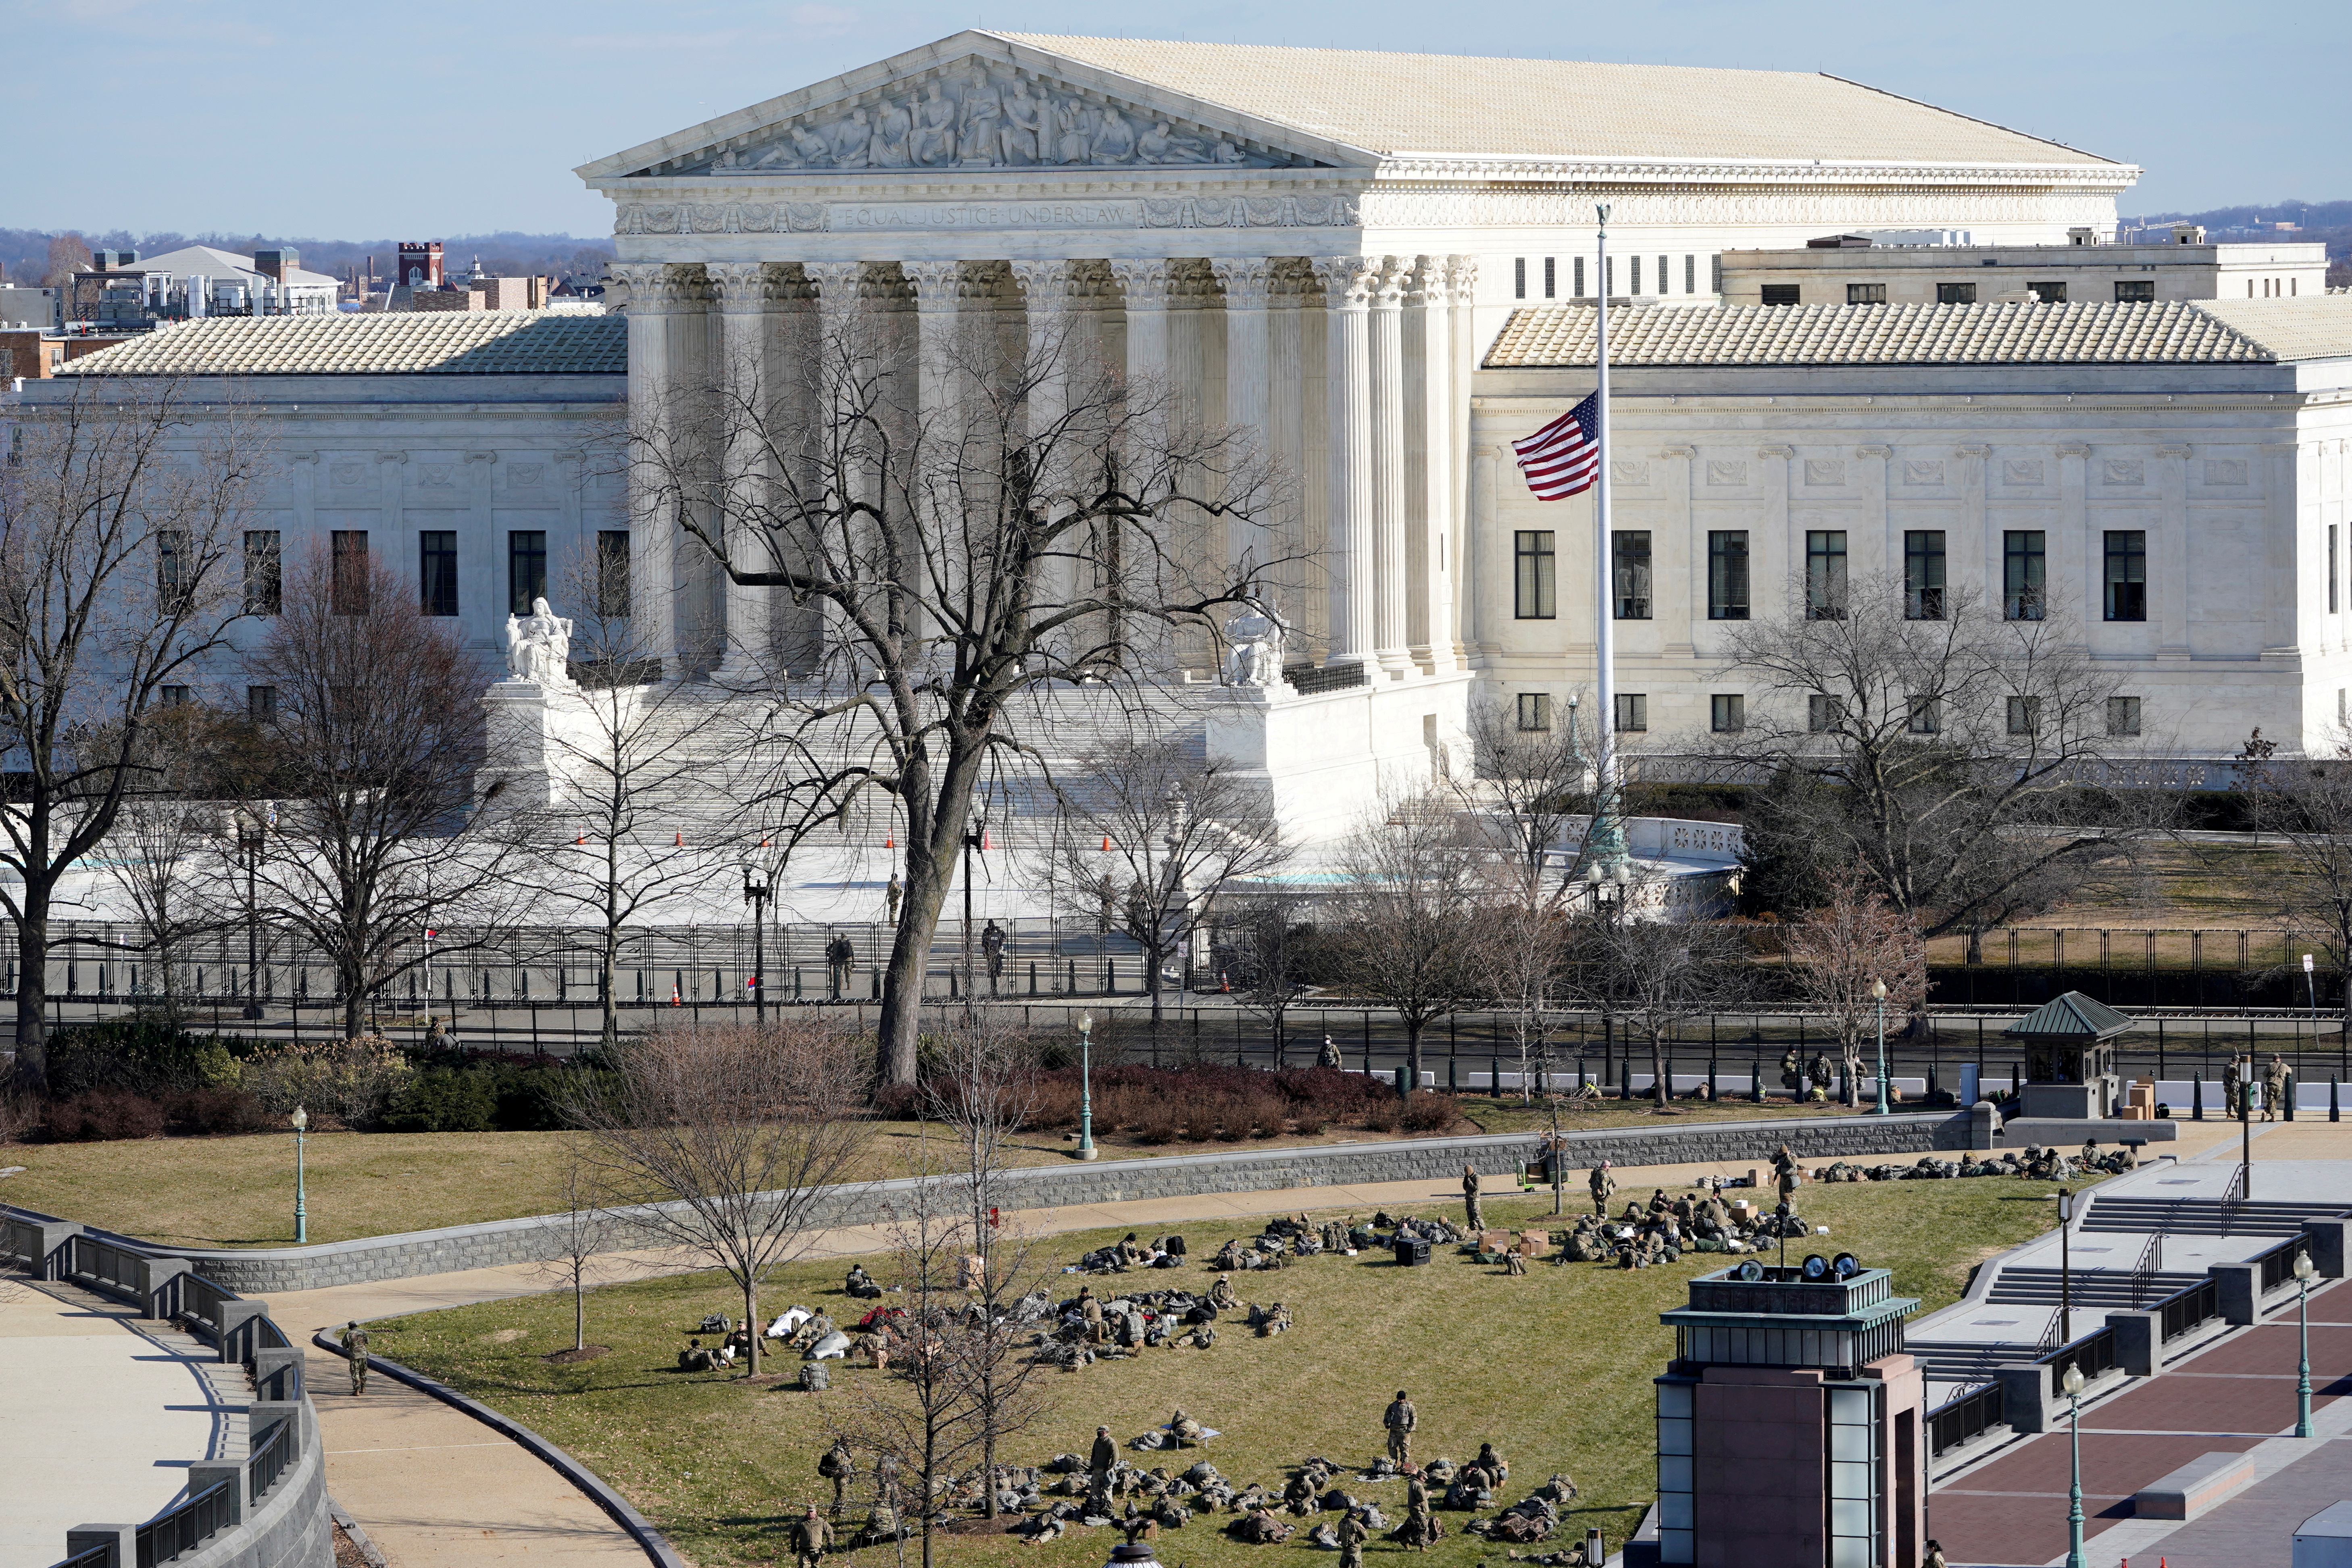 View of the Supreme Court in Washington